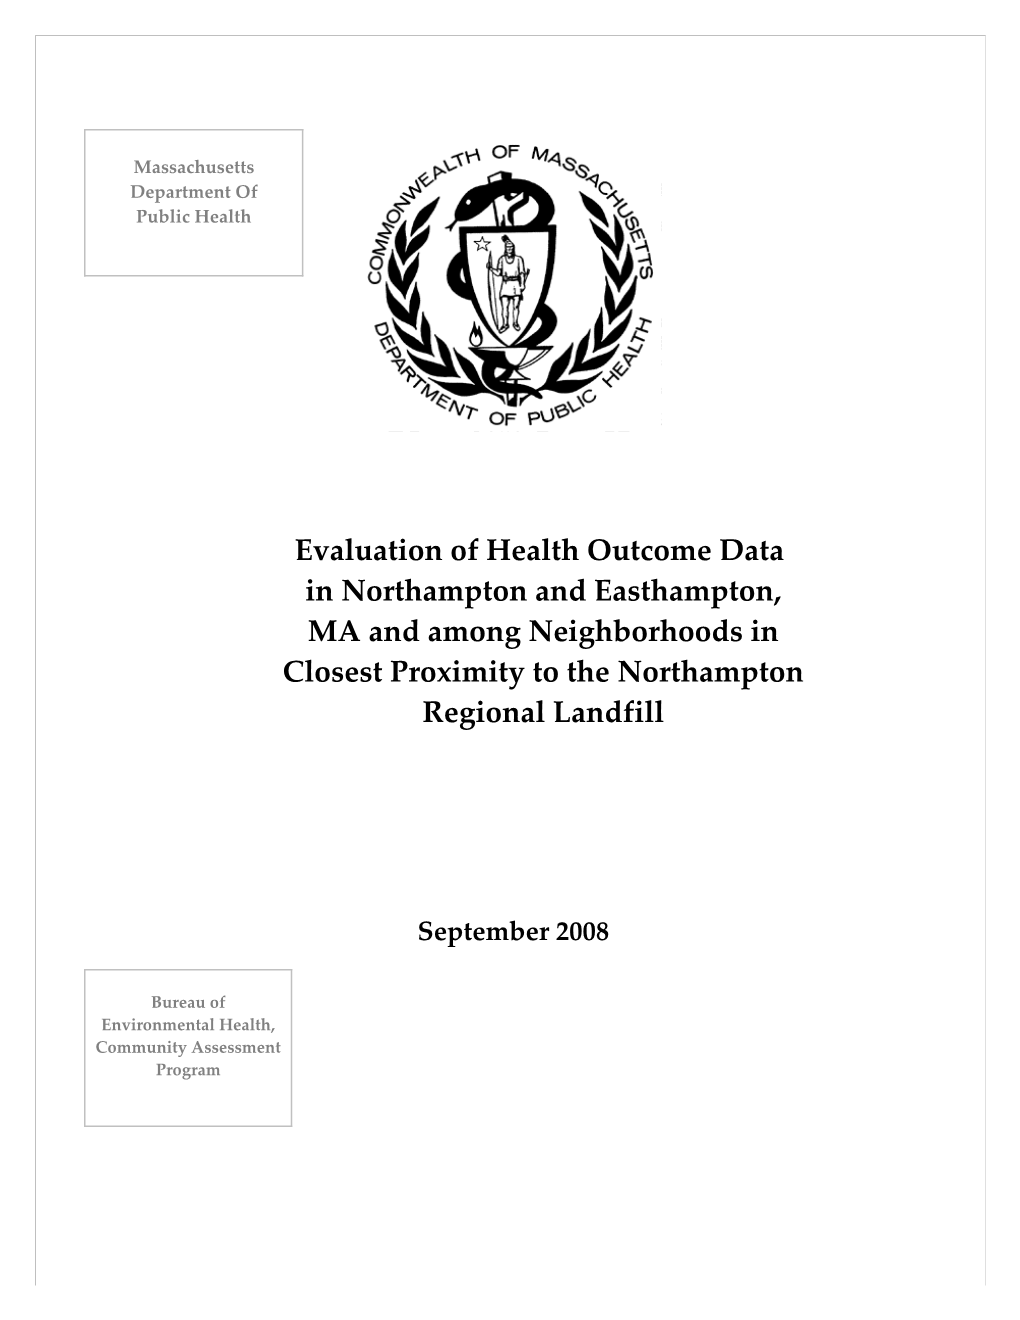 Evaluation of Health Outcome Data in Northampton, MA and Among Neighborhoods in Closest